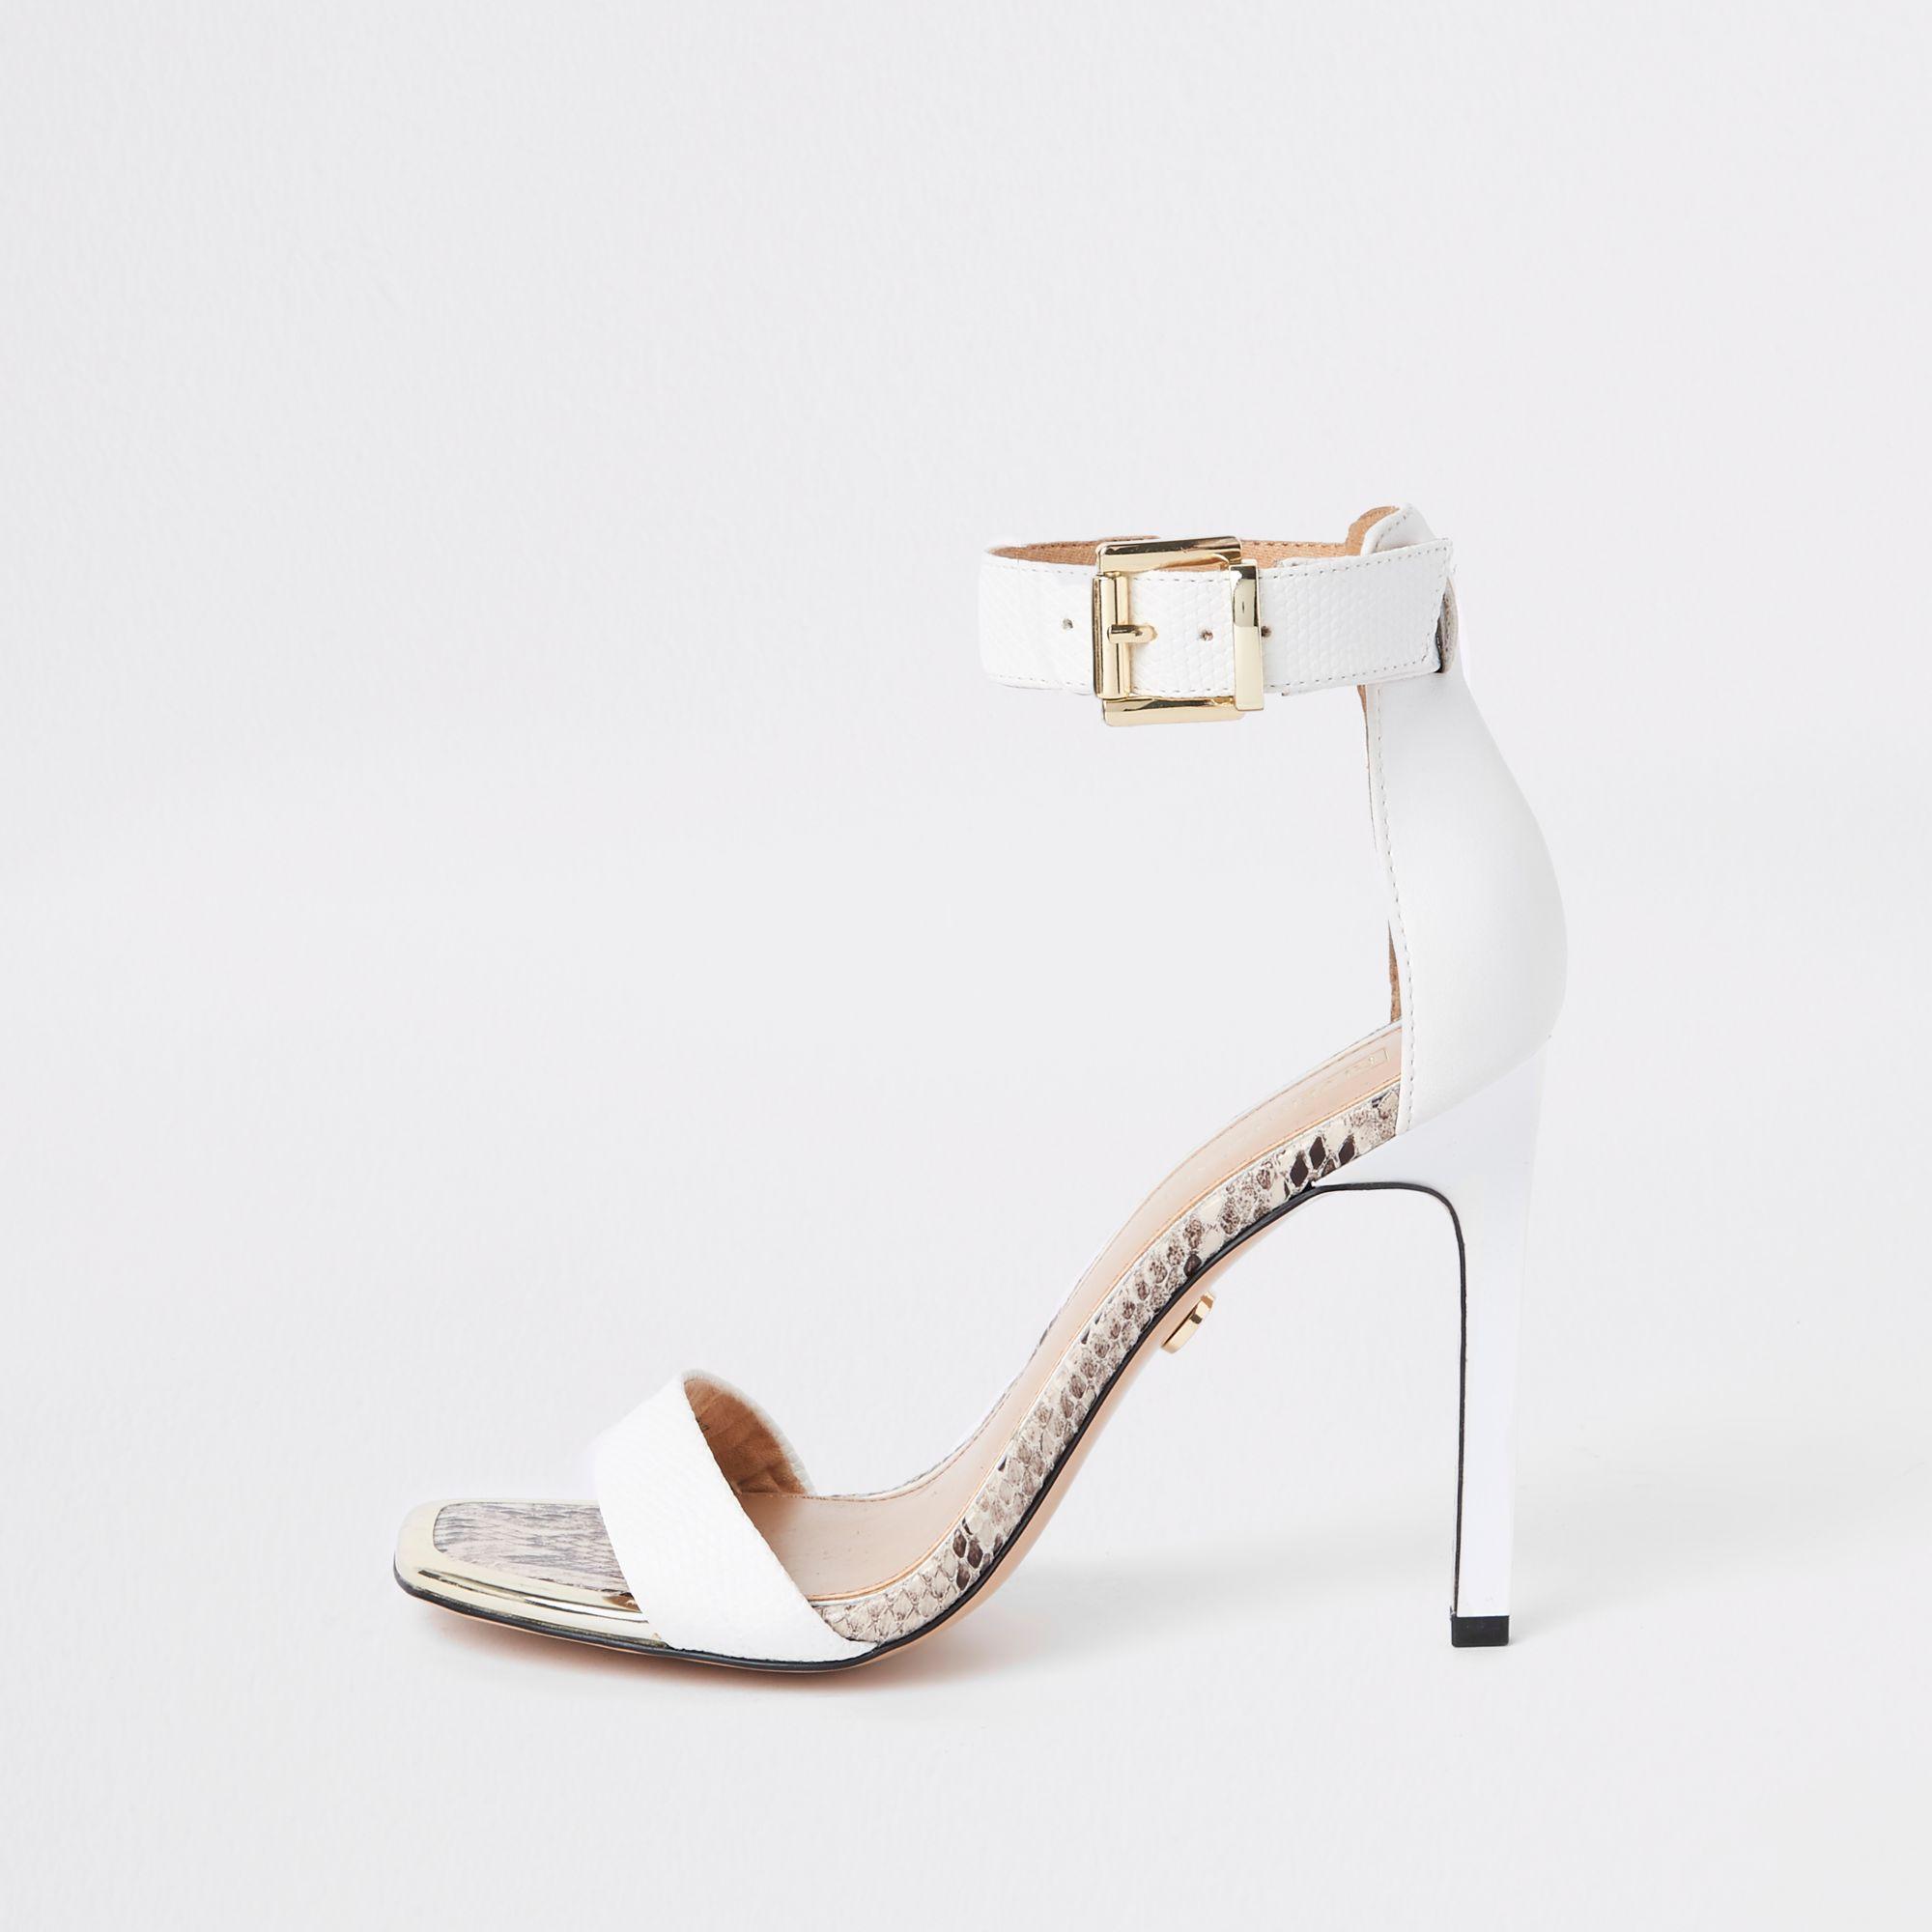 River Island Croc Barely There Square Toe Sandals in White - Lyst